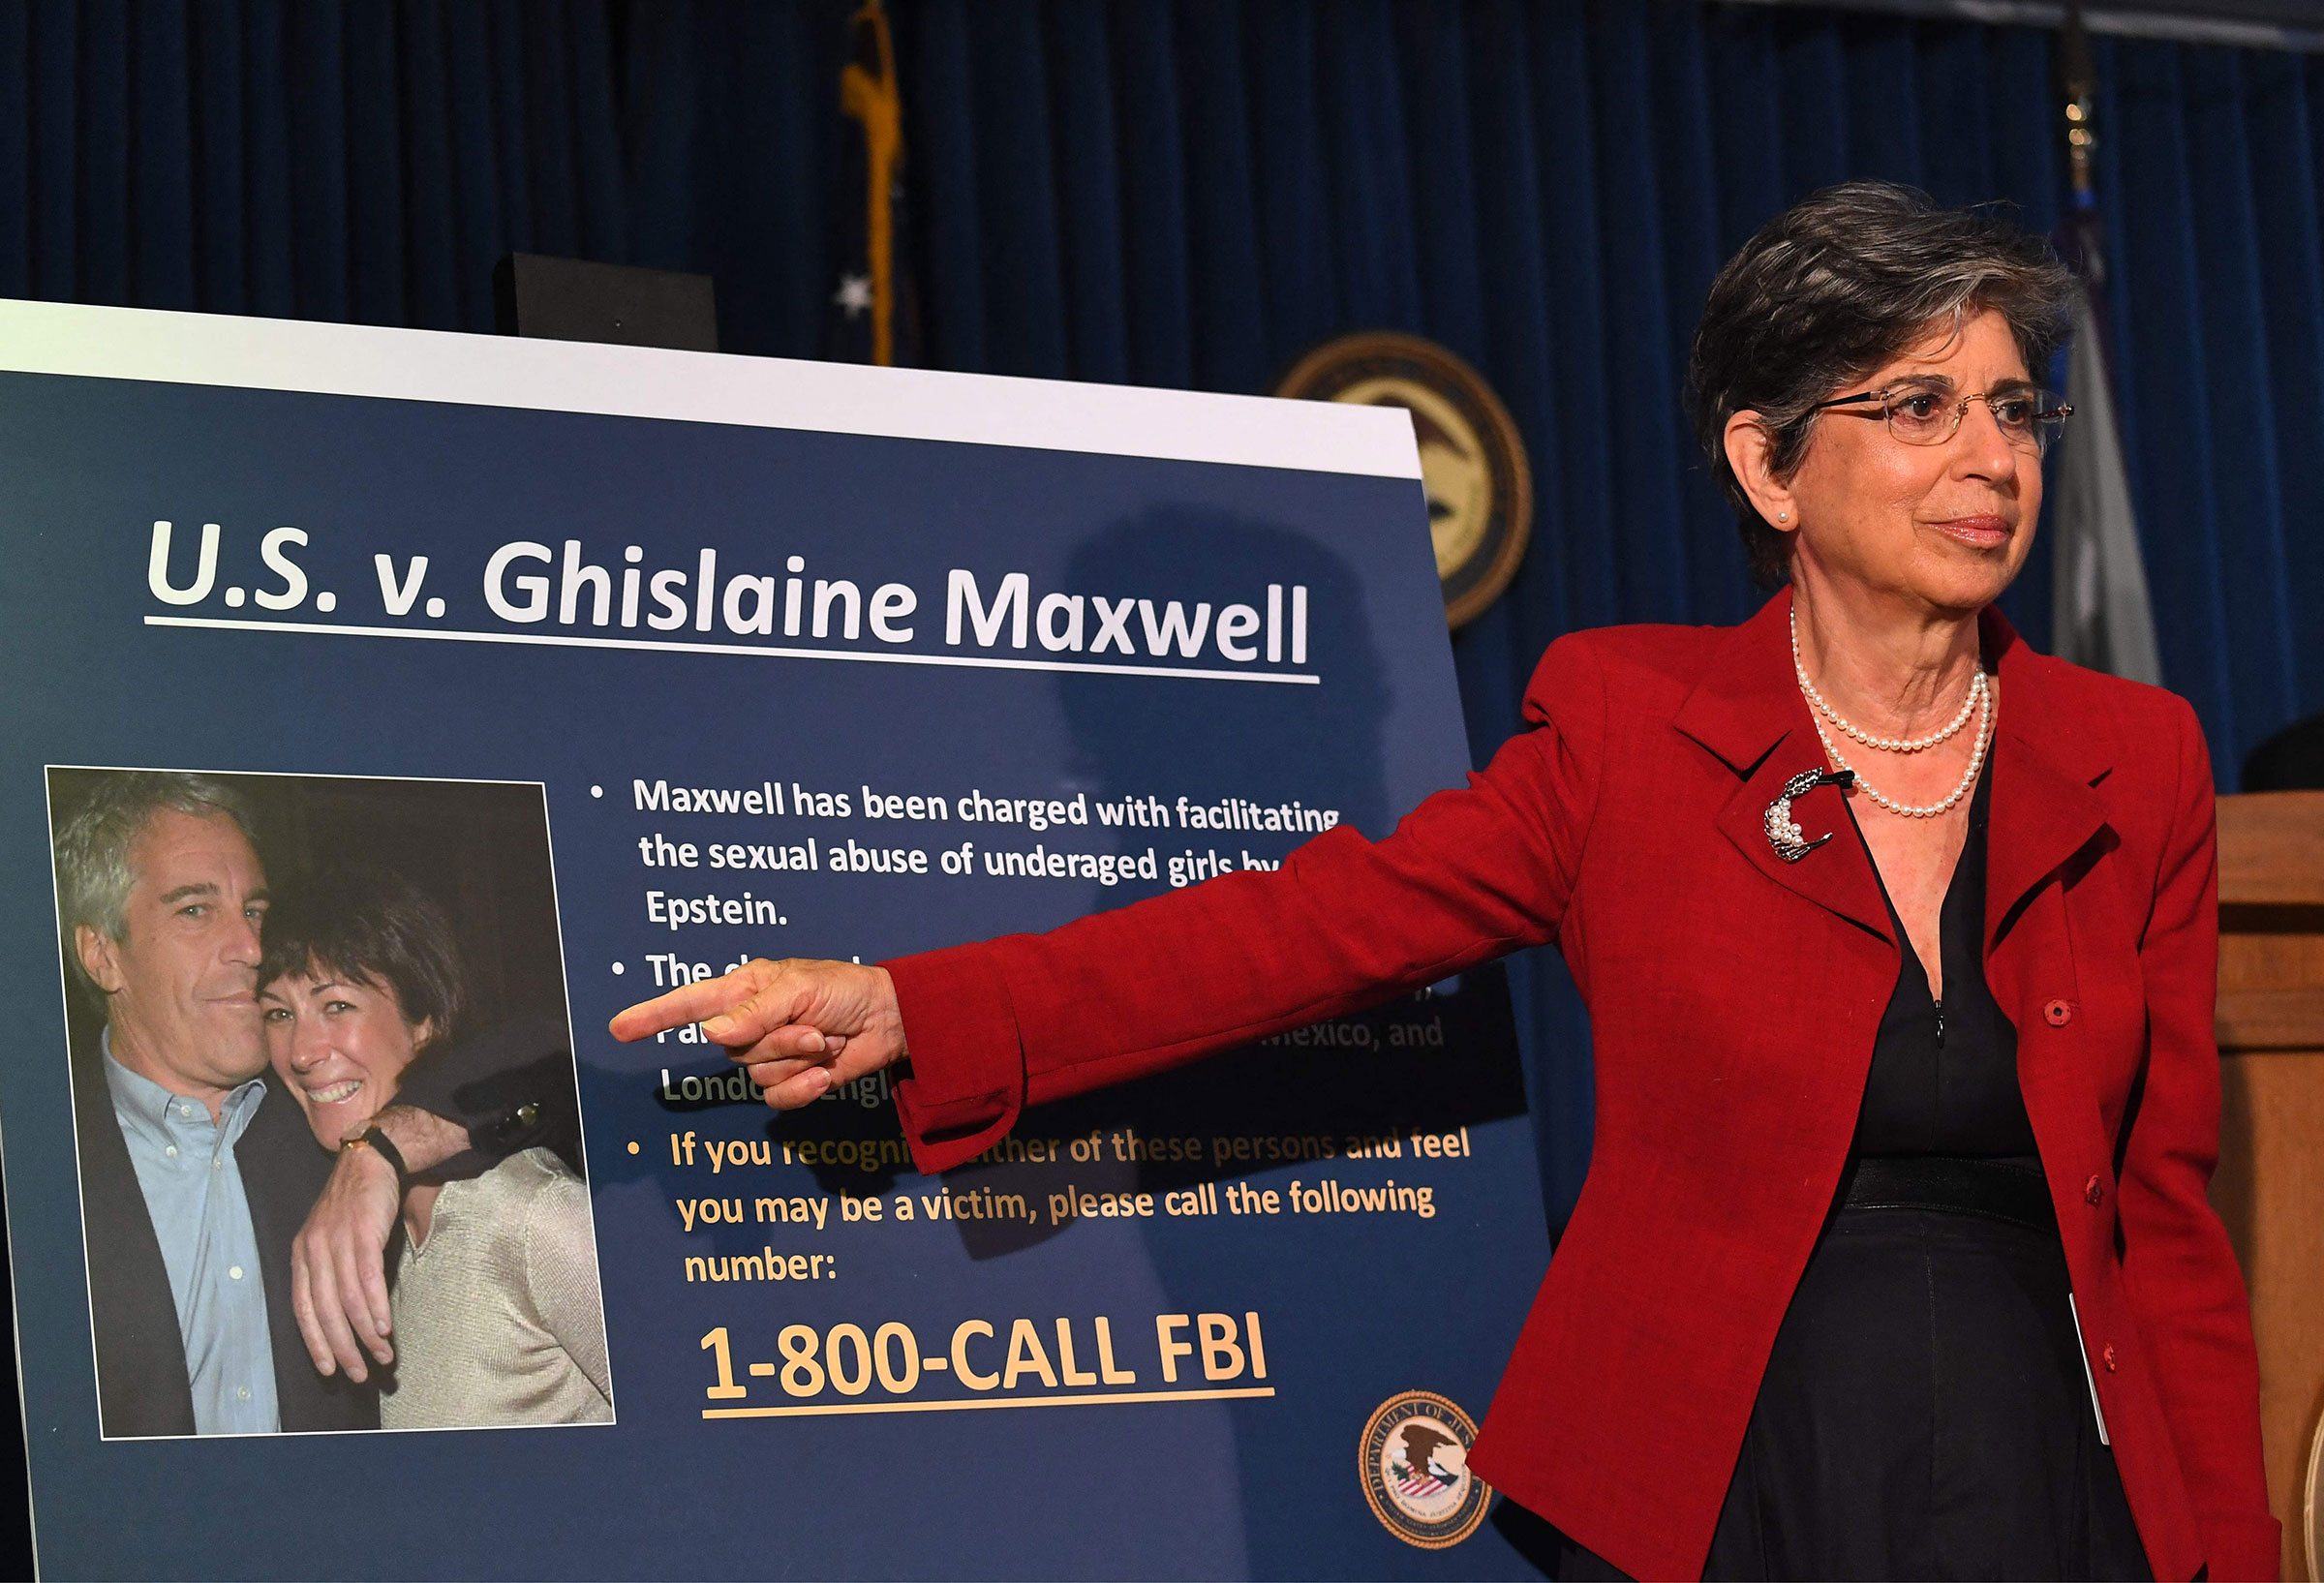 Acting US Attorney for the Southern District of New York, Audrey Strauss, announces charges against Ghislaine Maxwell during a press conference in New York City on July 2, 2020. (Johannes Eisele—AFP/Getty Images)